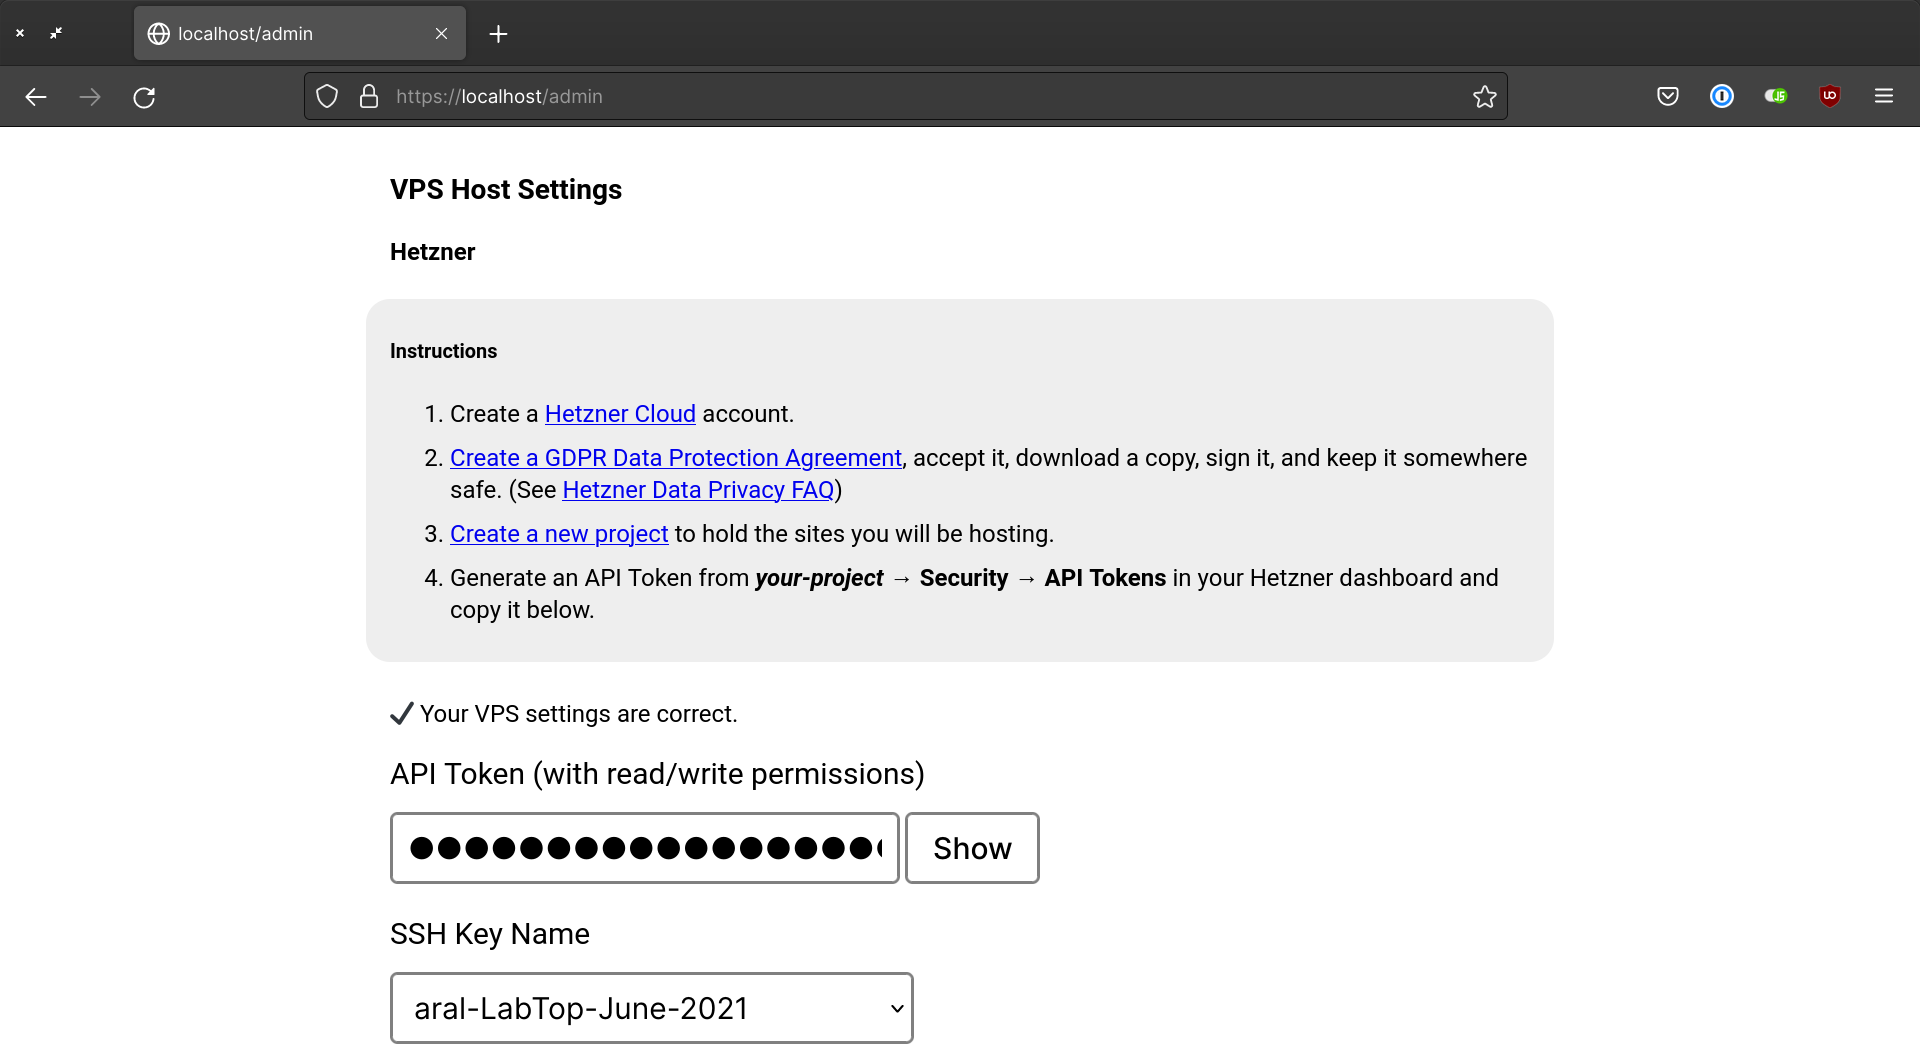 Screenshot of the Domain administration panel showing the VPS Host Settings screen with API Token and SSH Key Name input boxes.